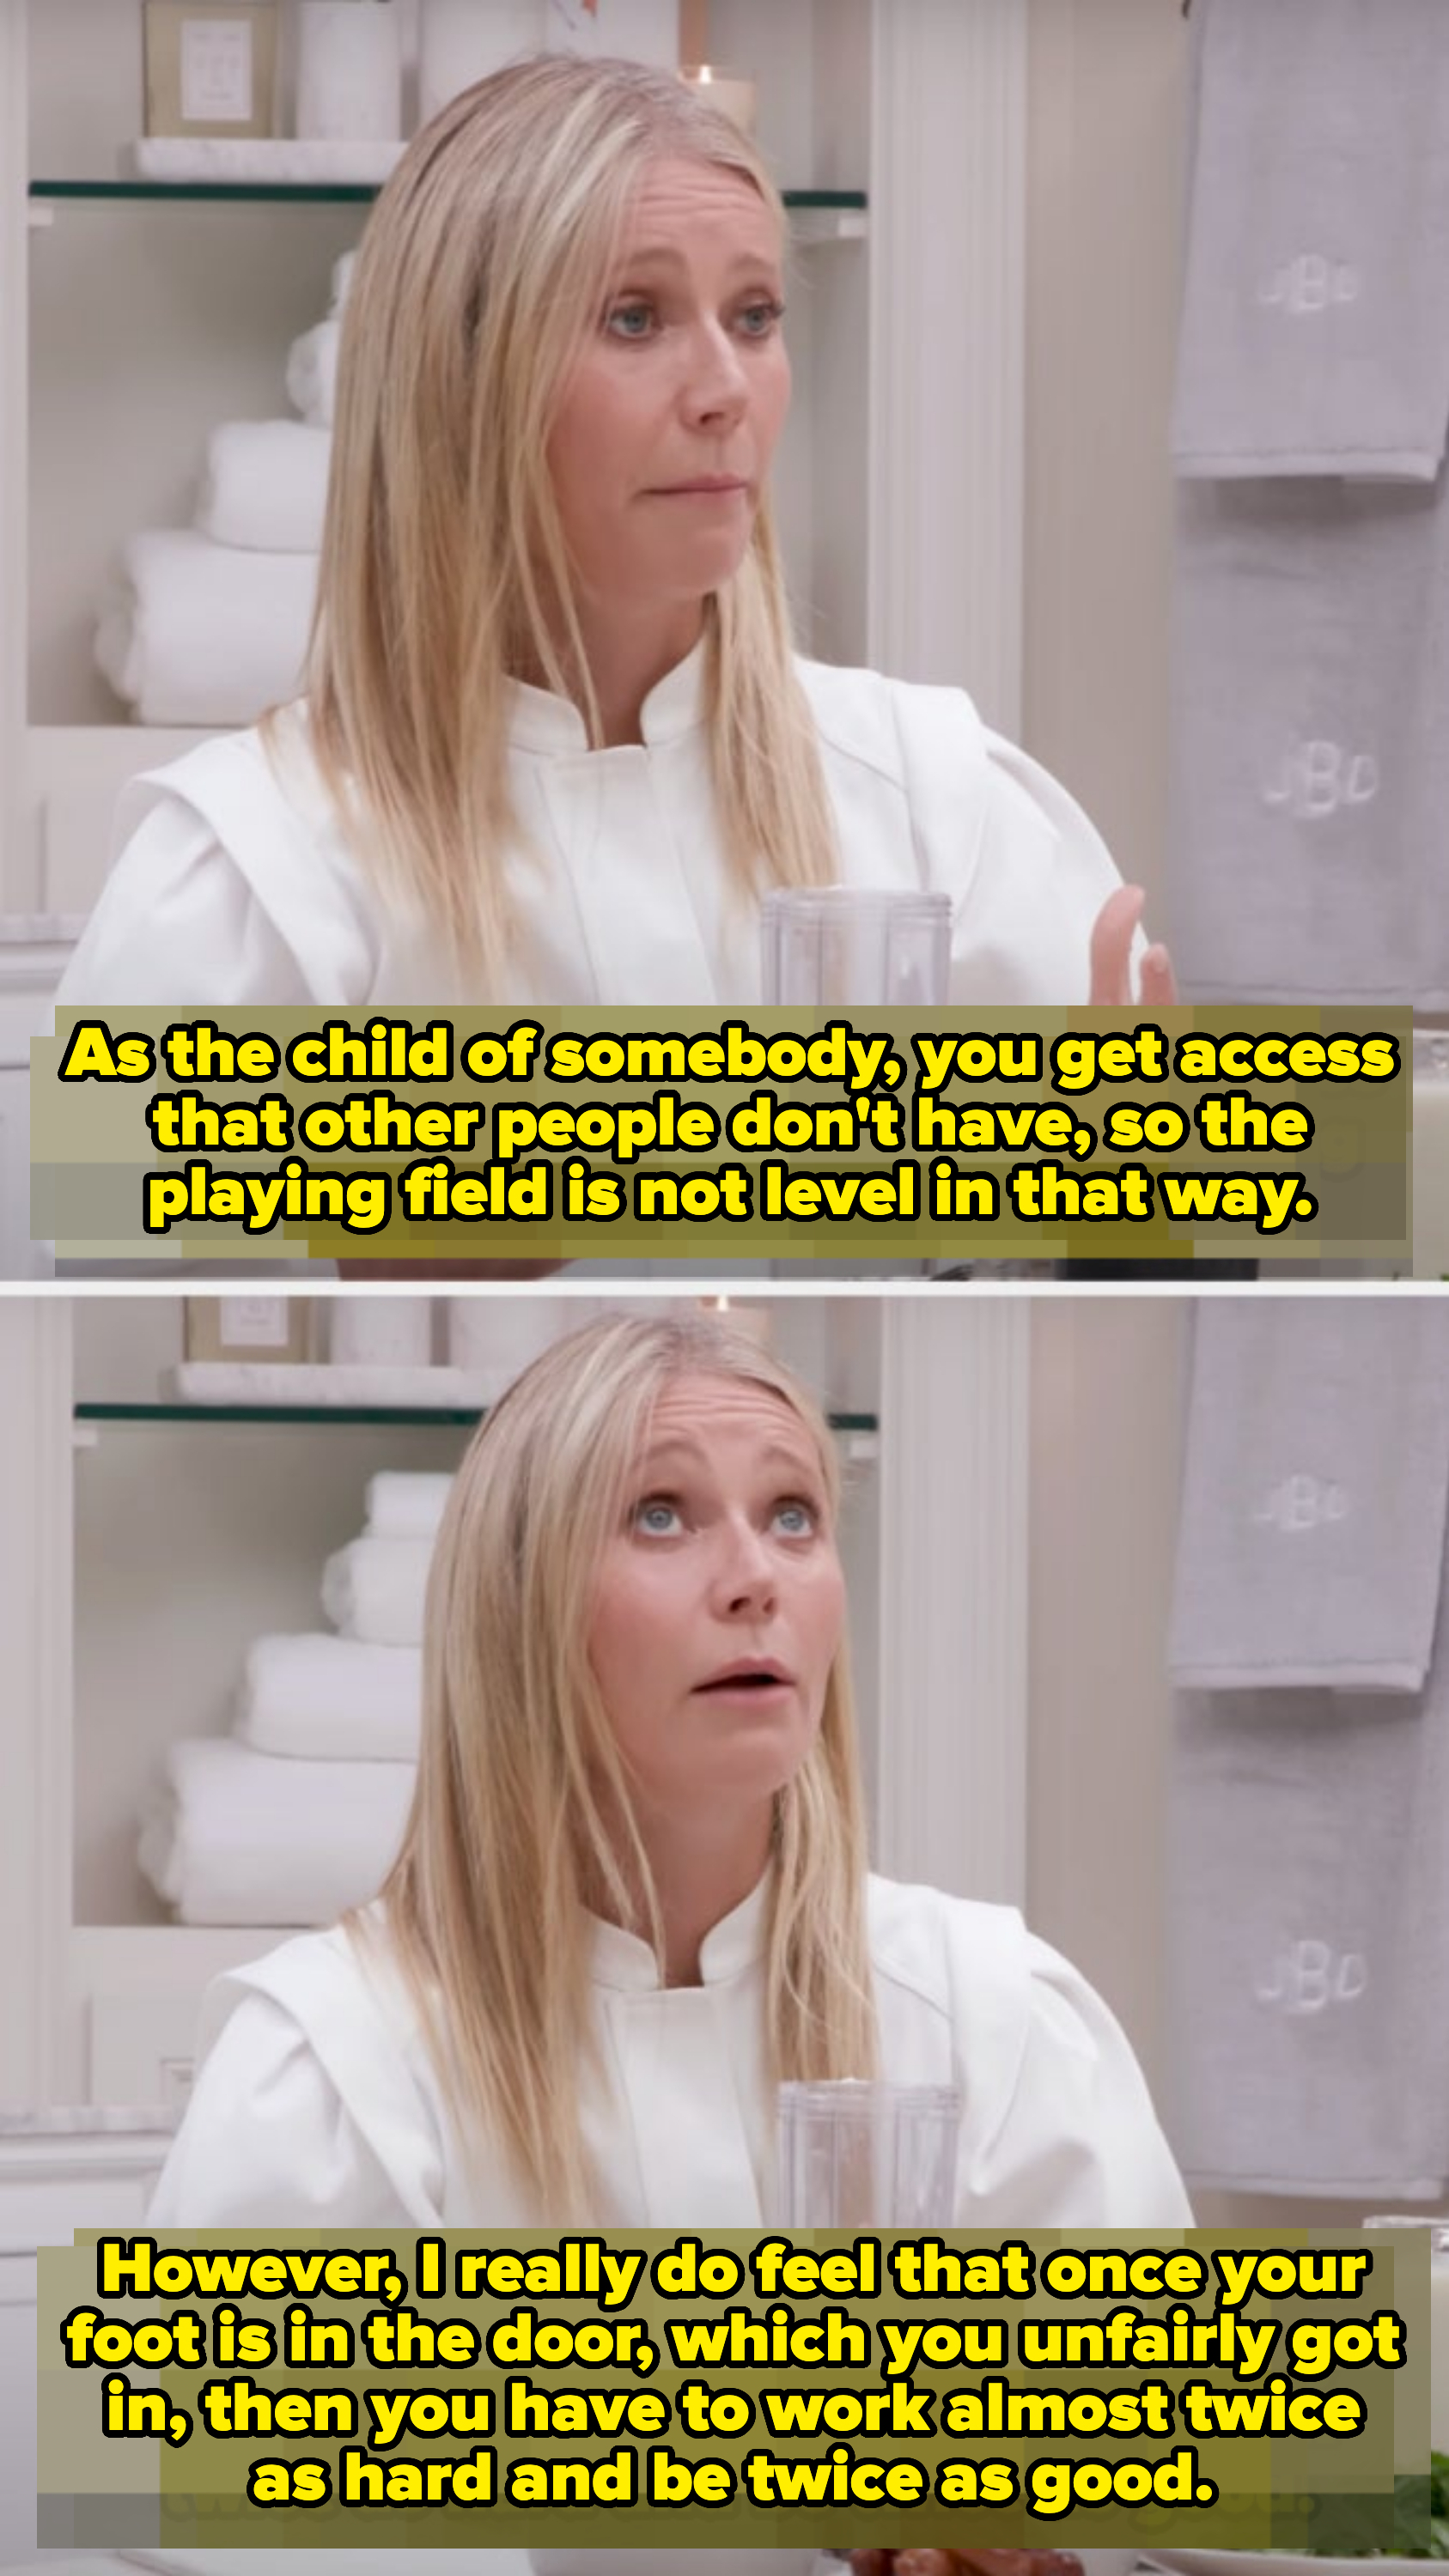 Gwyneth saying that being the child of a famous person does get you in the door, but once you&#x27;re &quot;unfairly&quot; in, &quot;then you almost have to work twice as hard and be twice as good&quot;